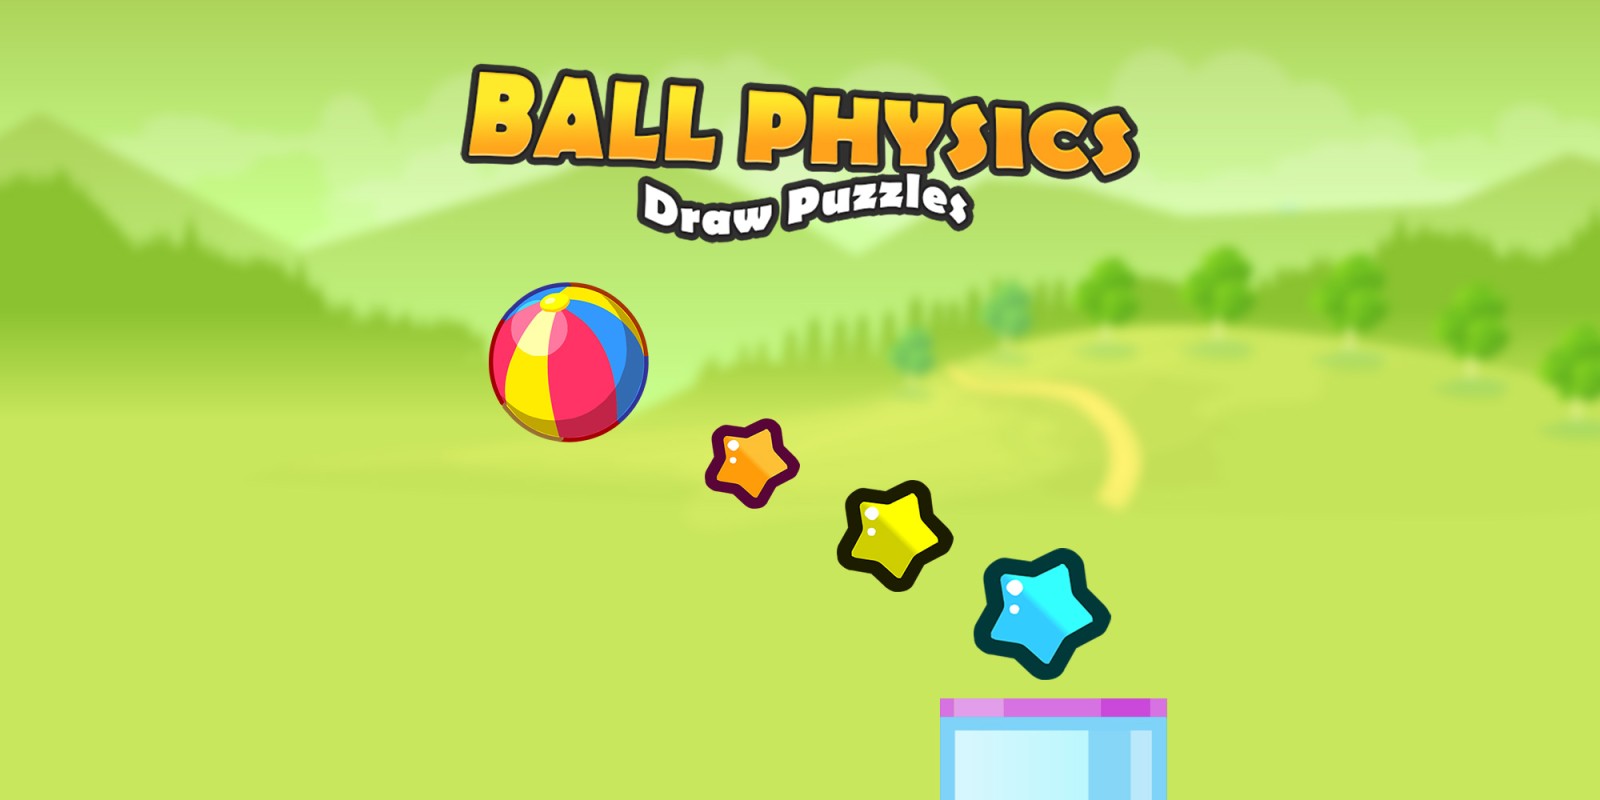 Ball Physics Draw Puzzles Nintendo Switch download software Games